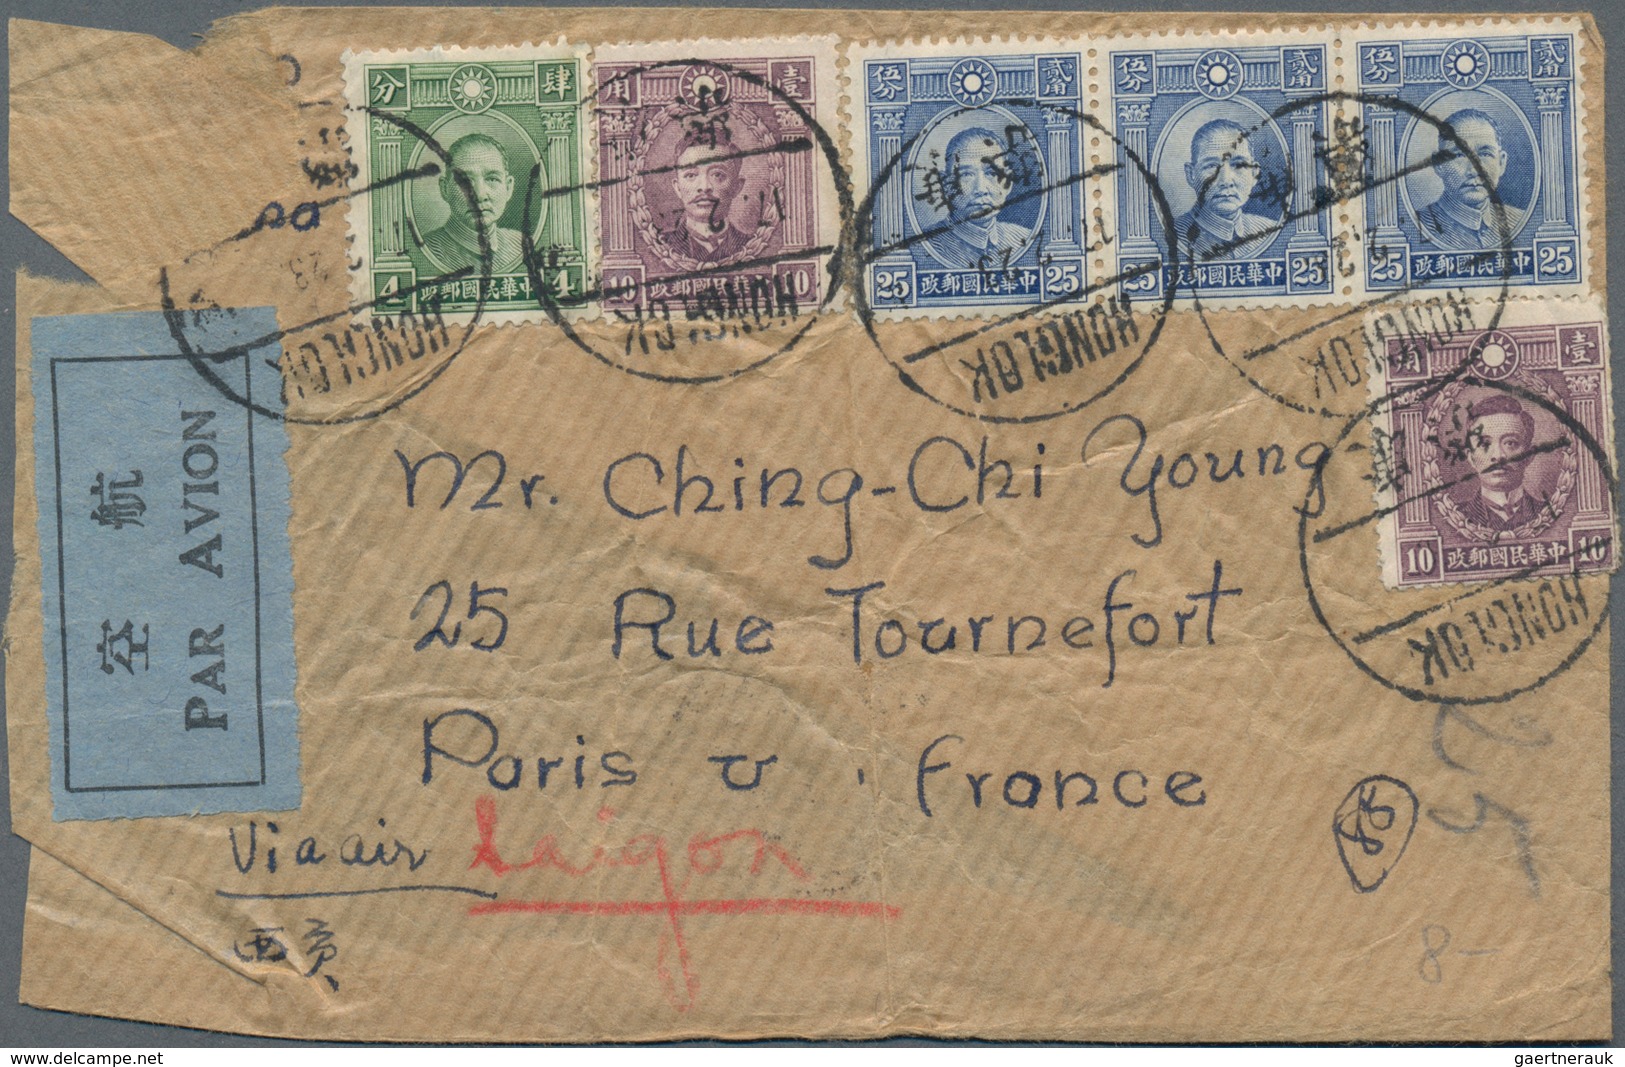 China: 1931/41, SYS and martyrs, covers (36 inc. one used ppc) all to foreign and many to Switzerlan